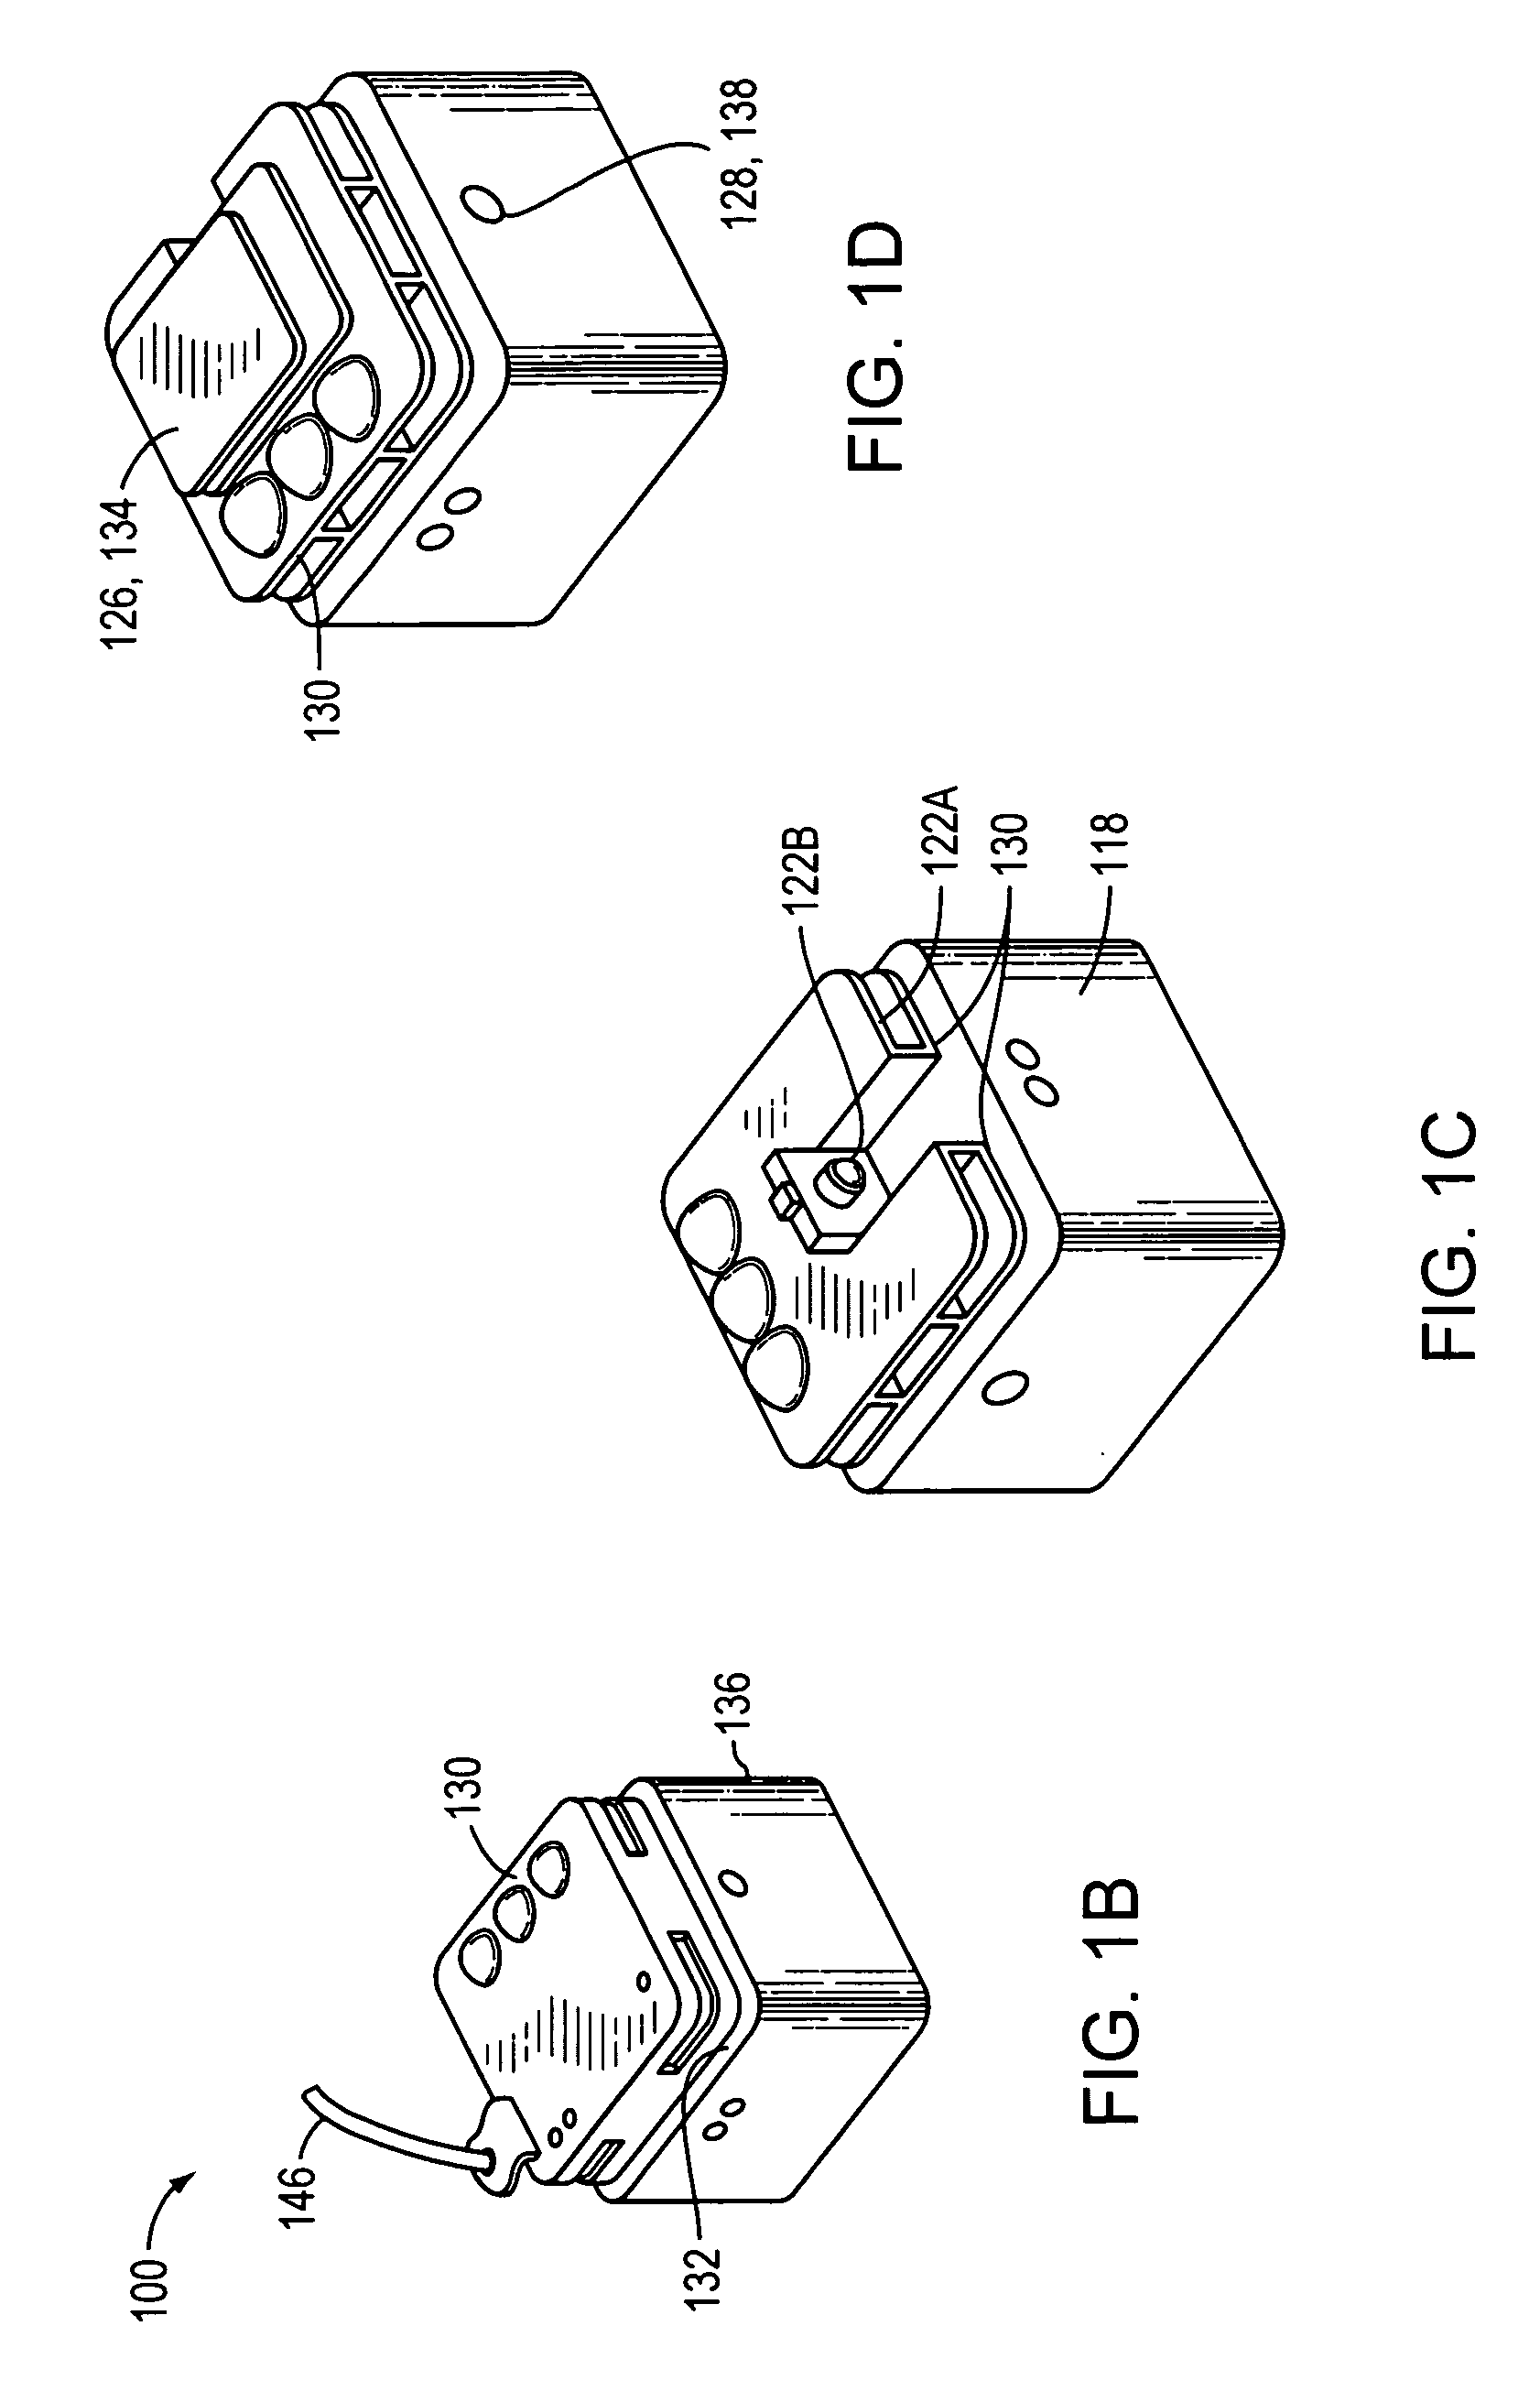 System and methods for adaptive control of robotic devices